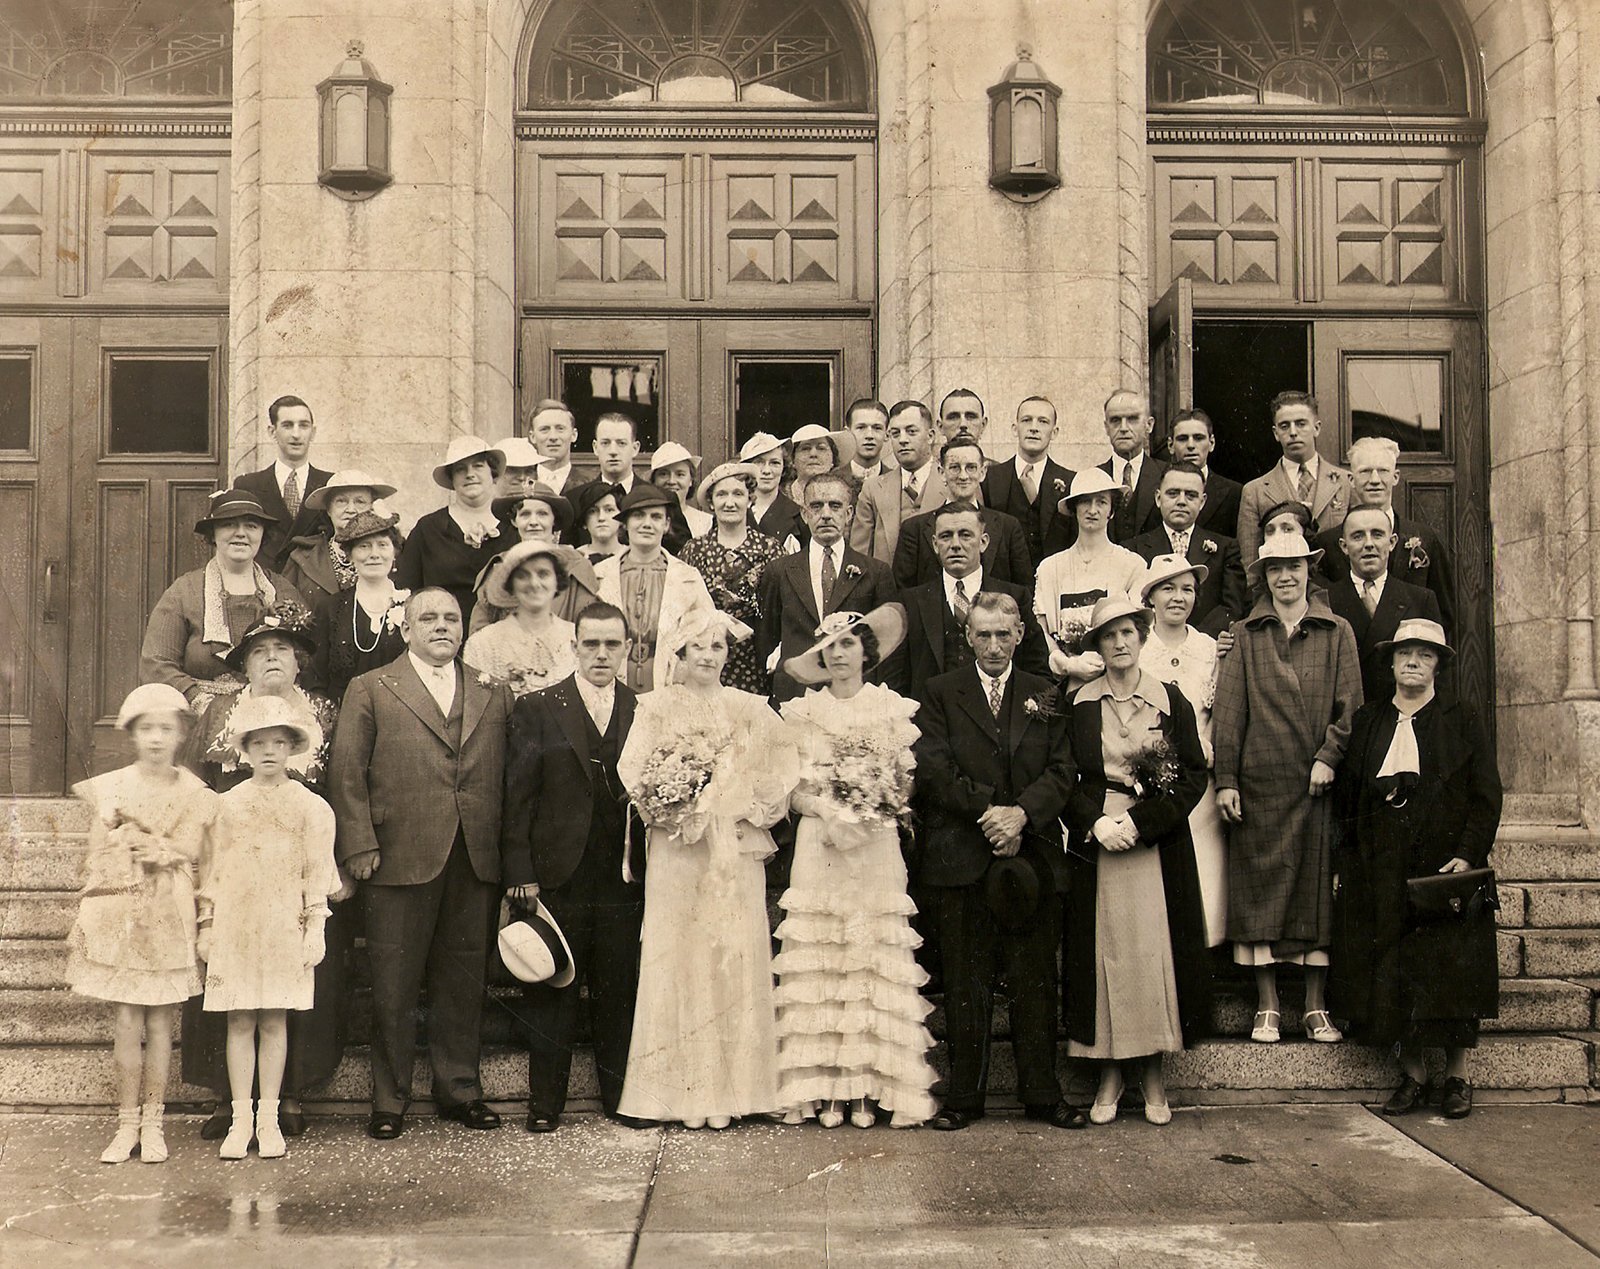 Wedding photo on the steps of St. Willibrord’s Church in Verdun, Quebec. Taken 15 August 1936 on the occasion of the marriage of Joseph Quinn to Mary Florence Dennison